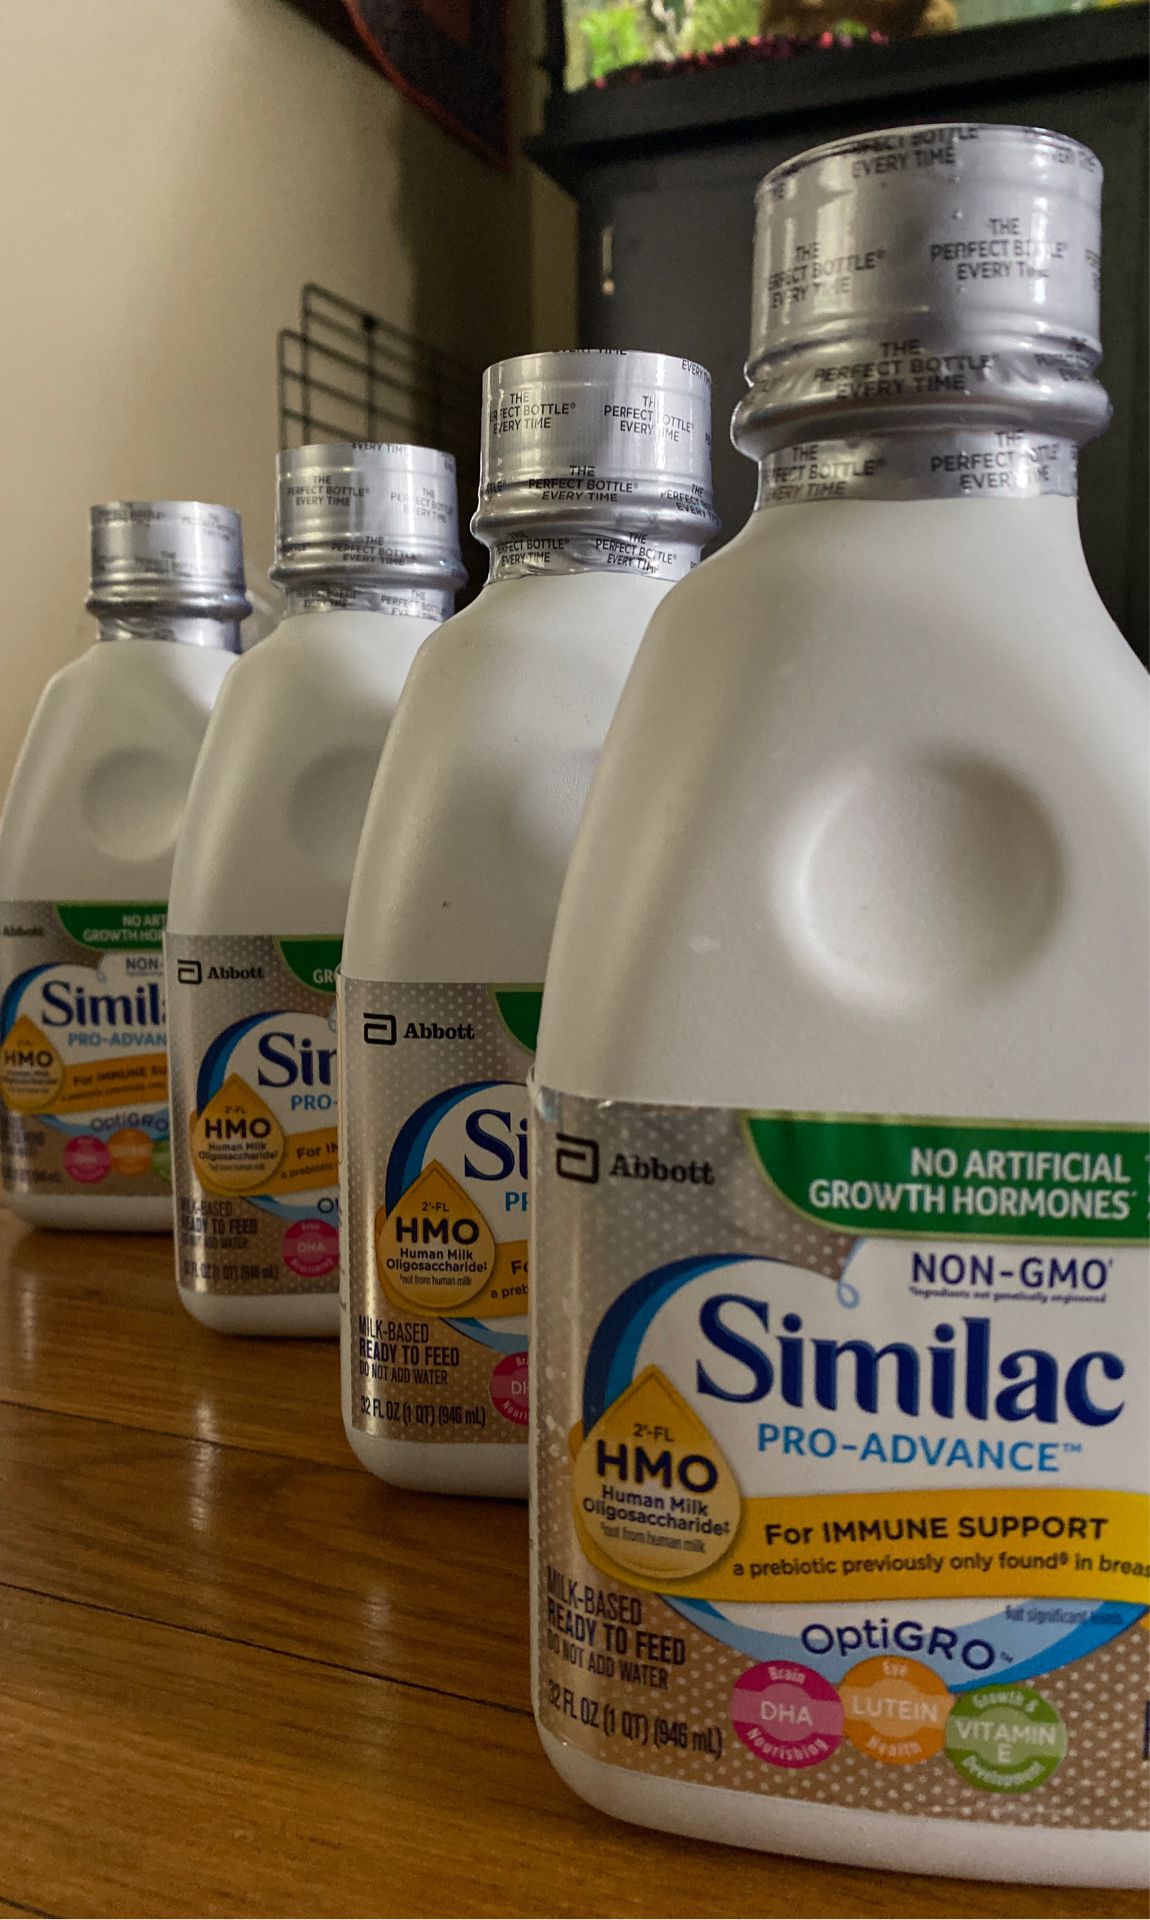 Similac Pro-Advance $10 for ALL 4 Bottles